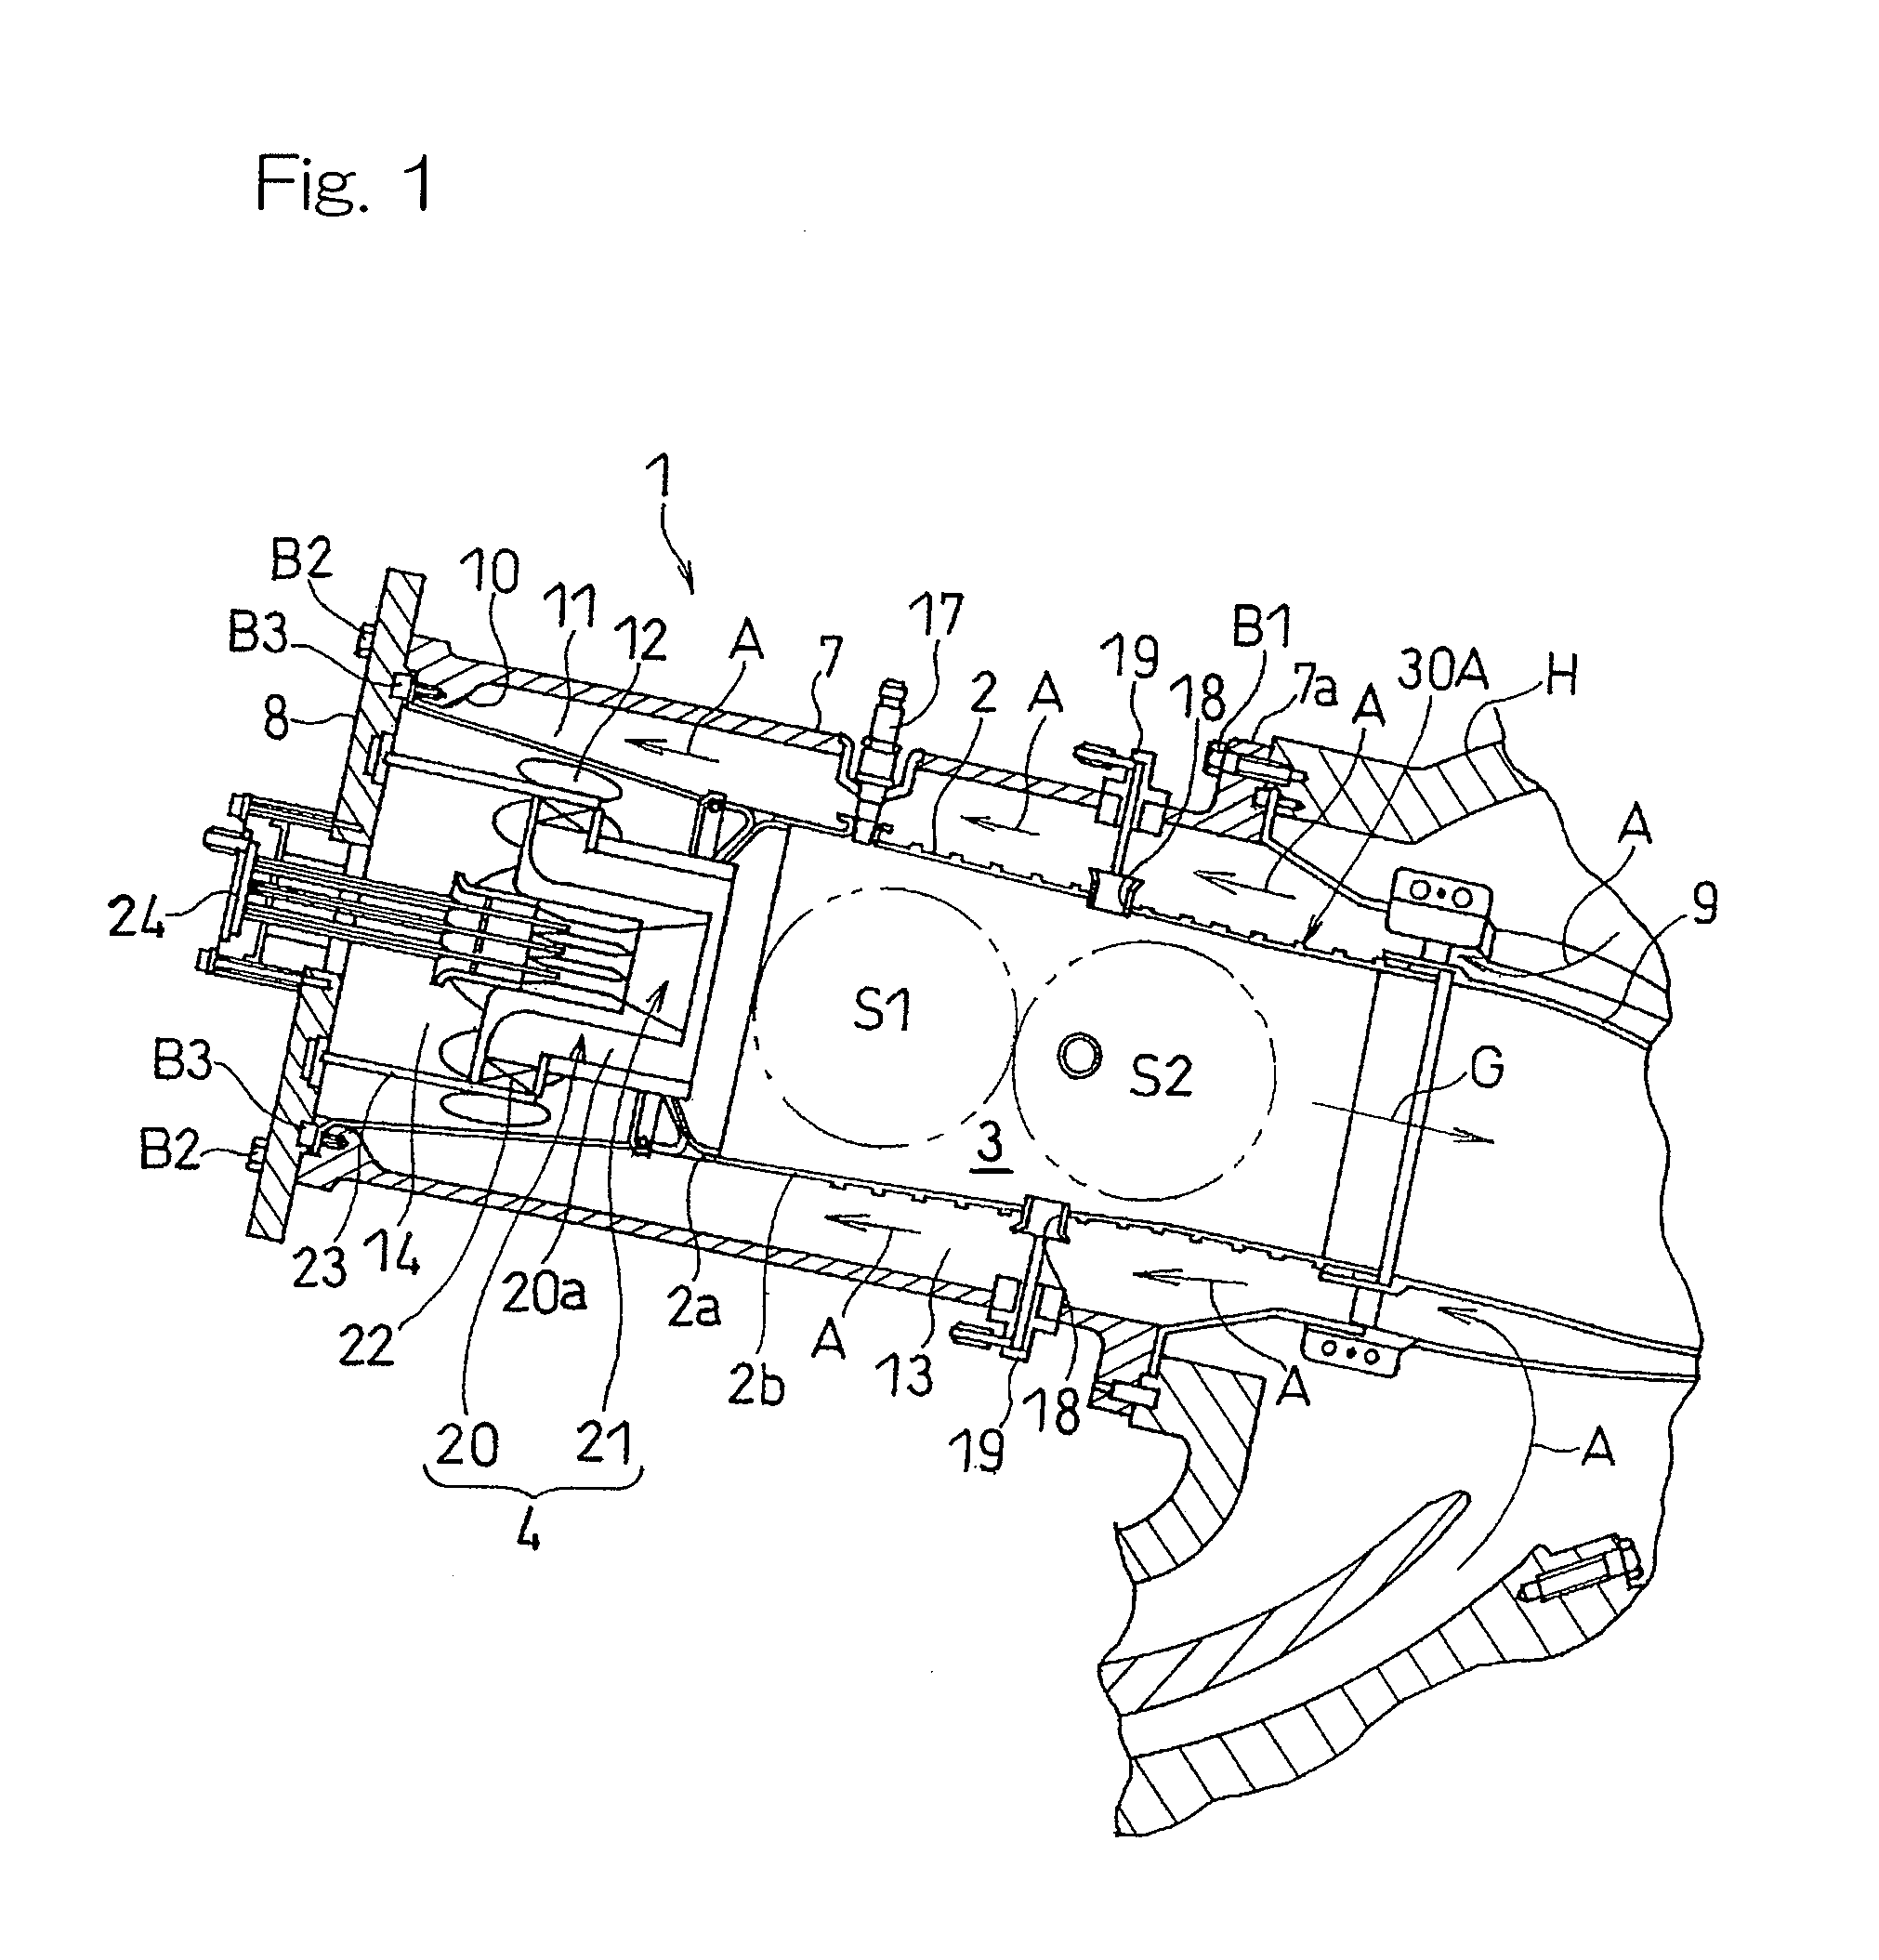 Cooling structure for gas turbine combustor